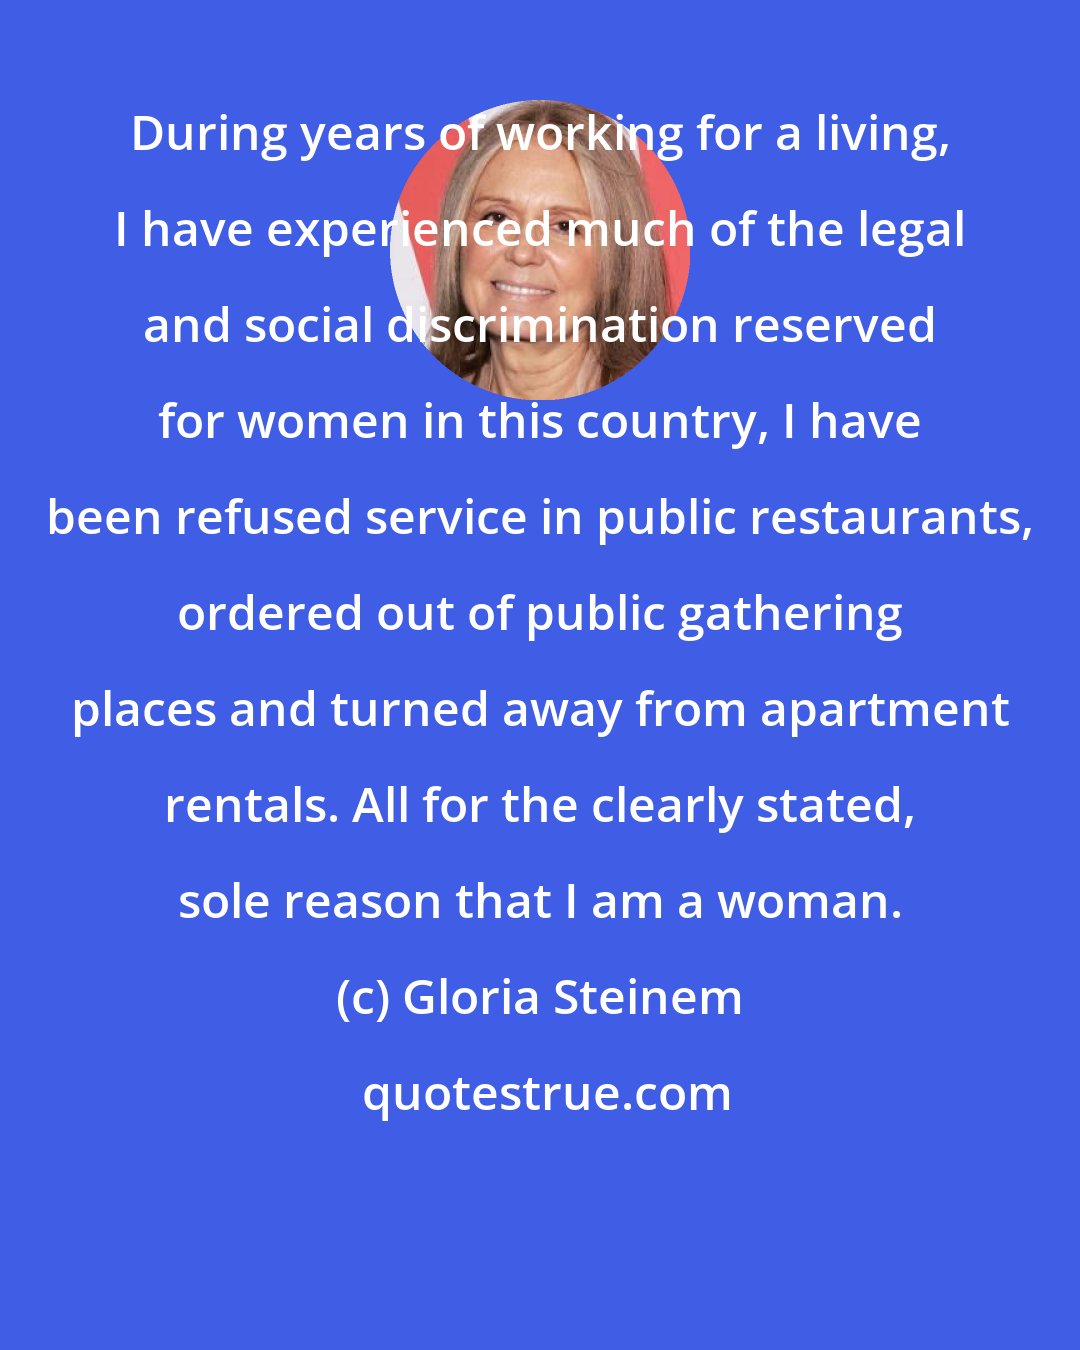 Gloria Steinem: During years of working for a living, I have experienced much of the legal and social discrimination reserved for women in this country, I have been refused service in public restaurants, ordered out of public gathering places and turned away from apartment rentals. All for the clearly stated, sole reason that I am a woman.